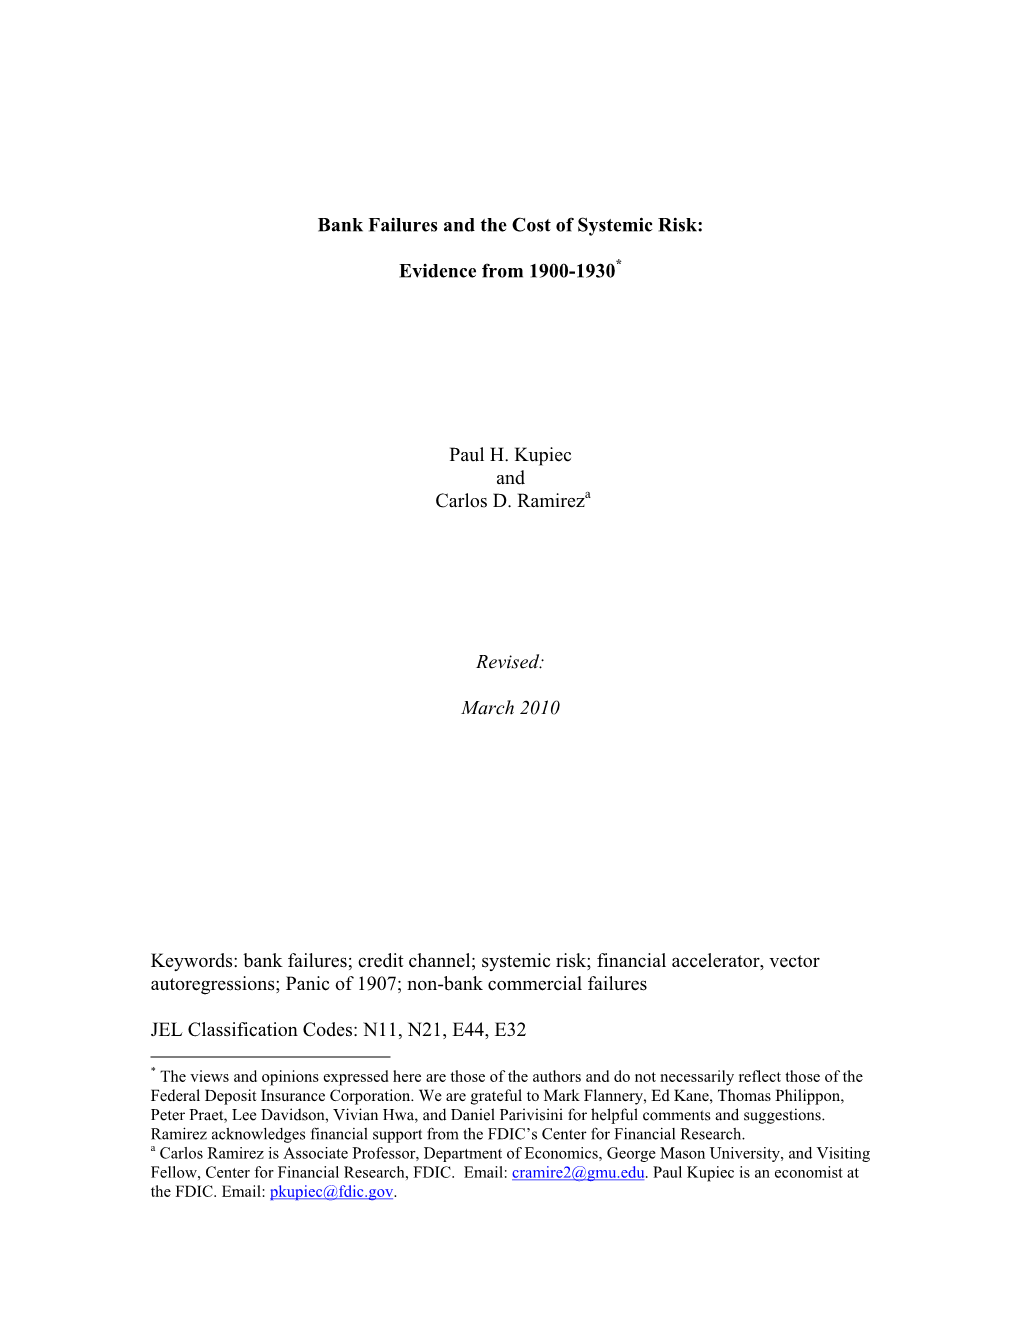 Bank Failures and the Cost of Systemic Risk: Evidence from 1900-1930